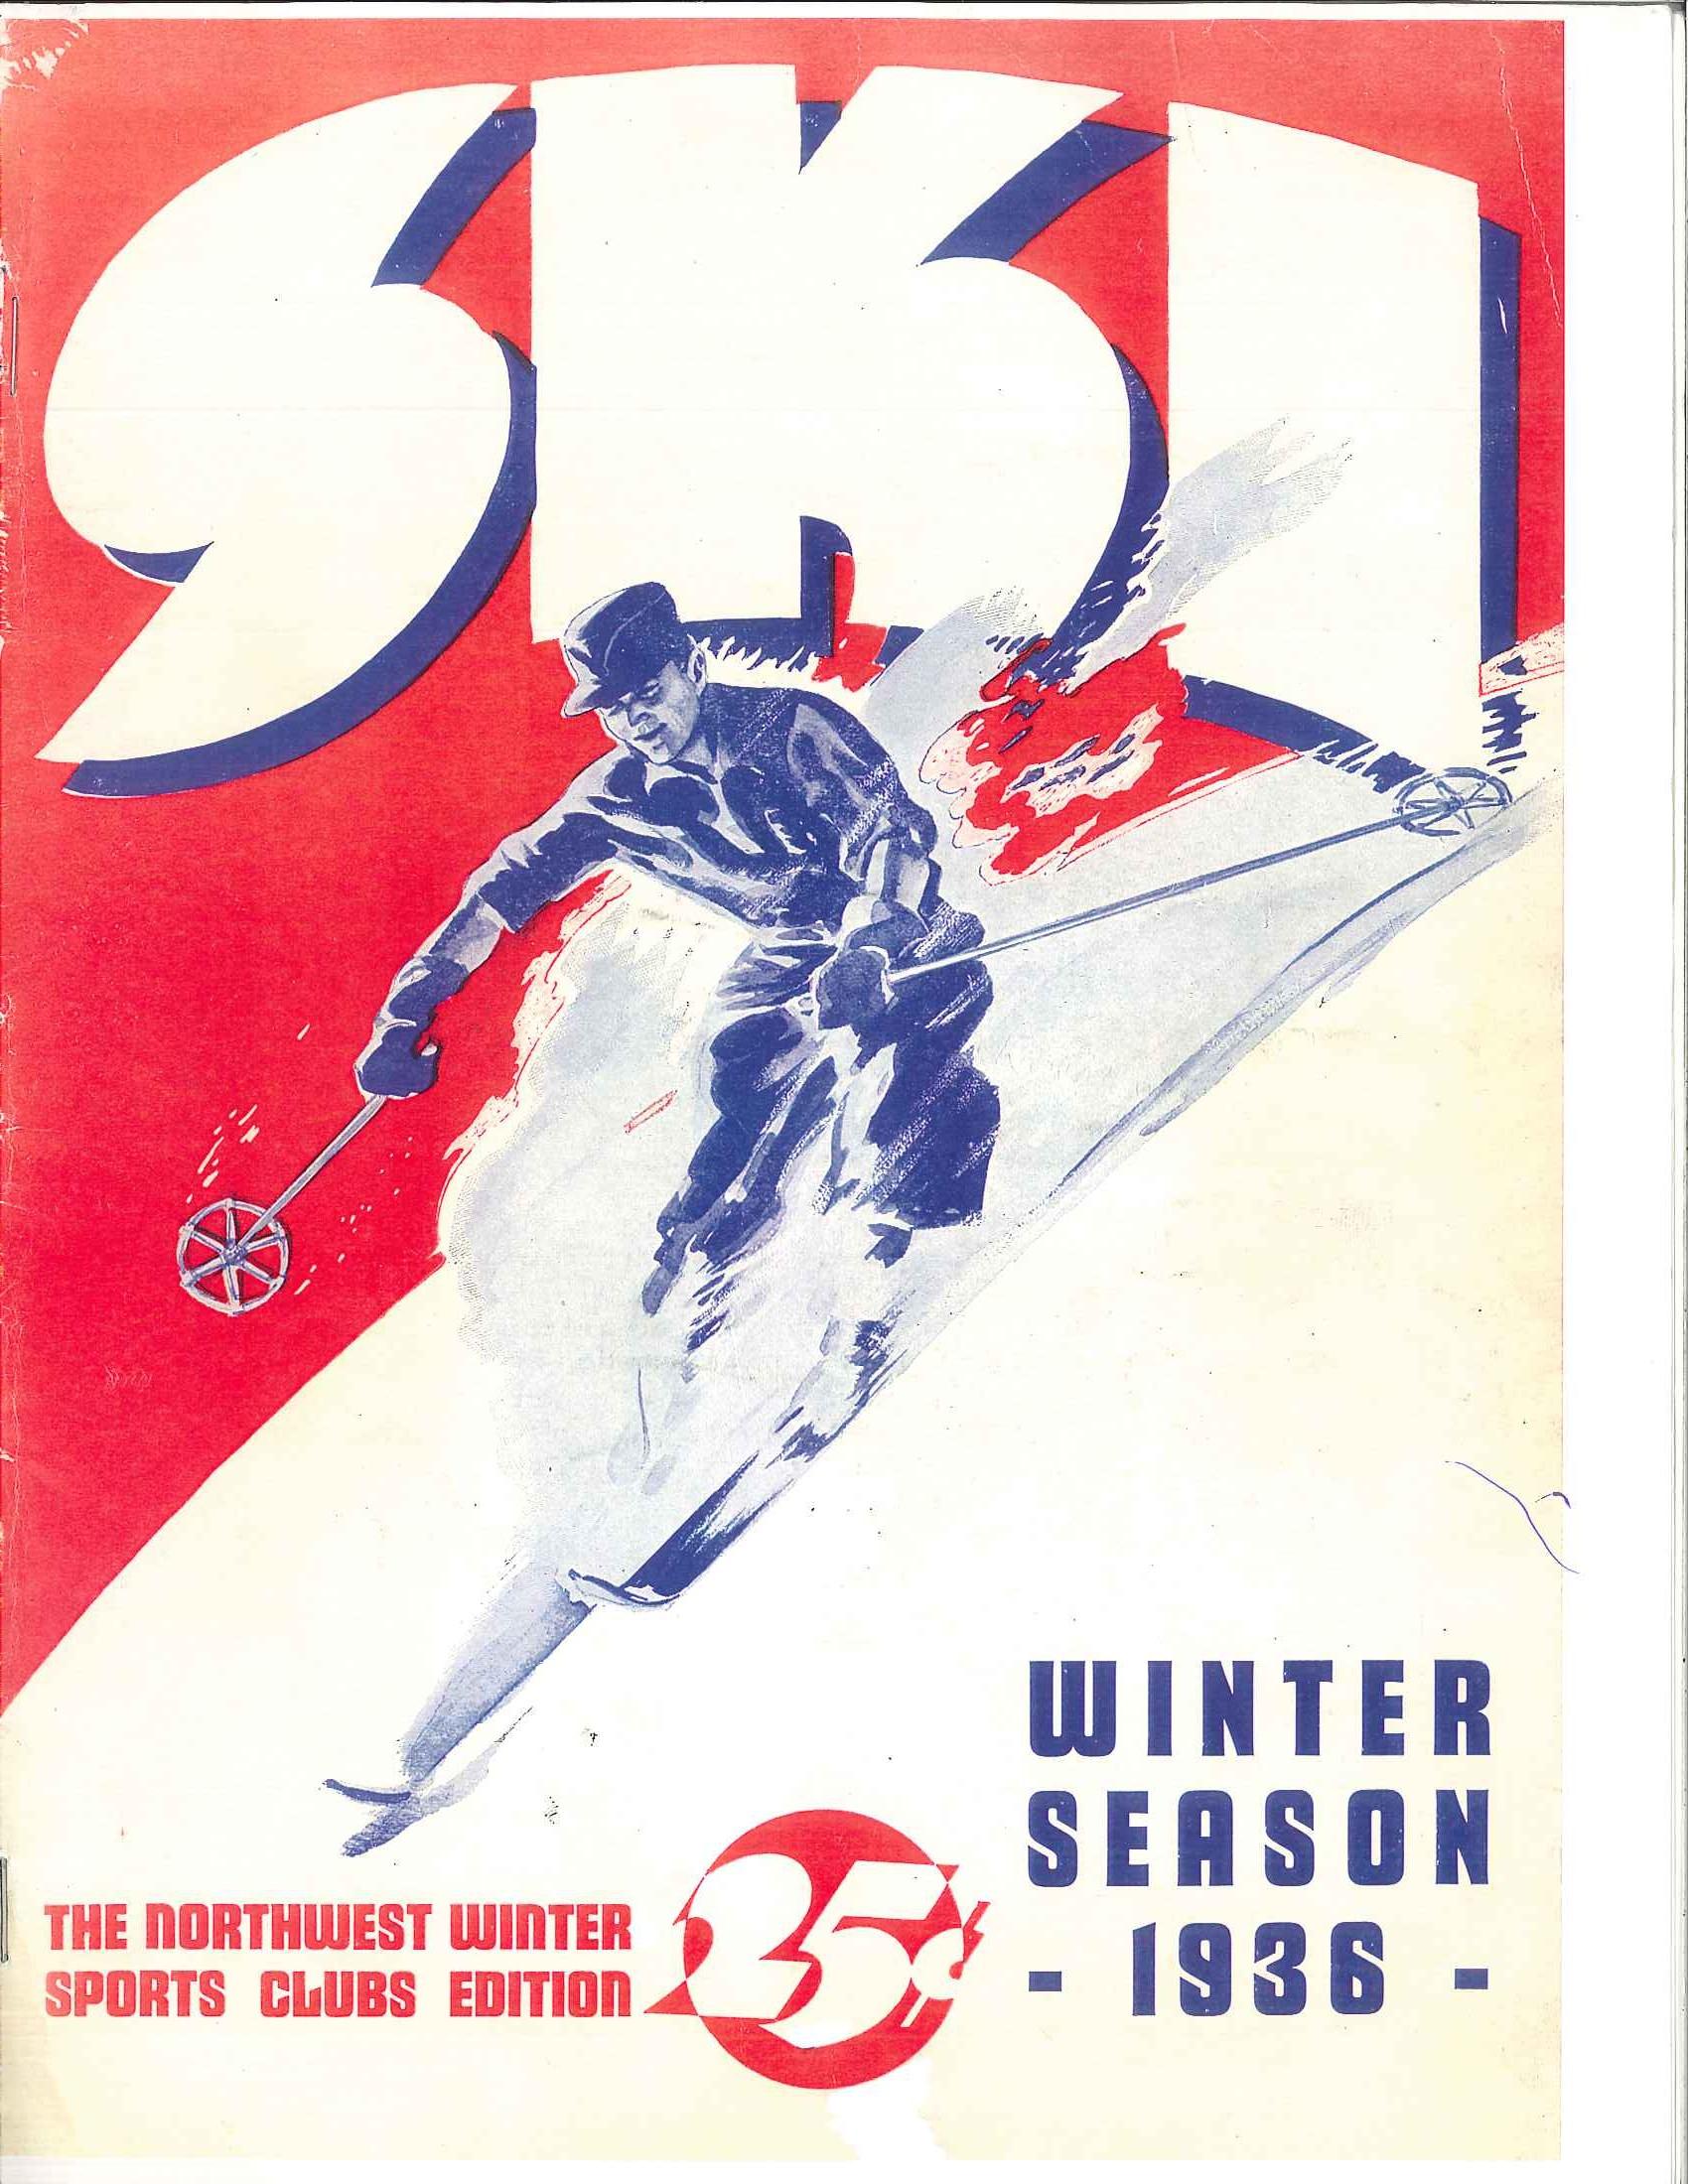 https://www.skiinghistory.org/sites/default/files/styles/cropped_image_3_4/public/SKI1936cover.jpg?itok=gL9UNEC9